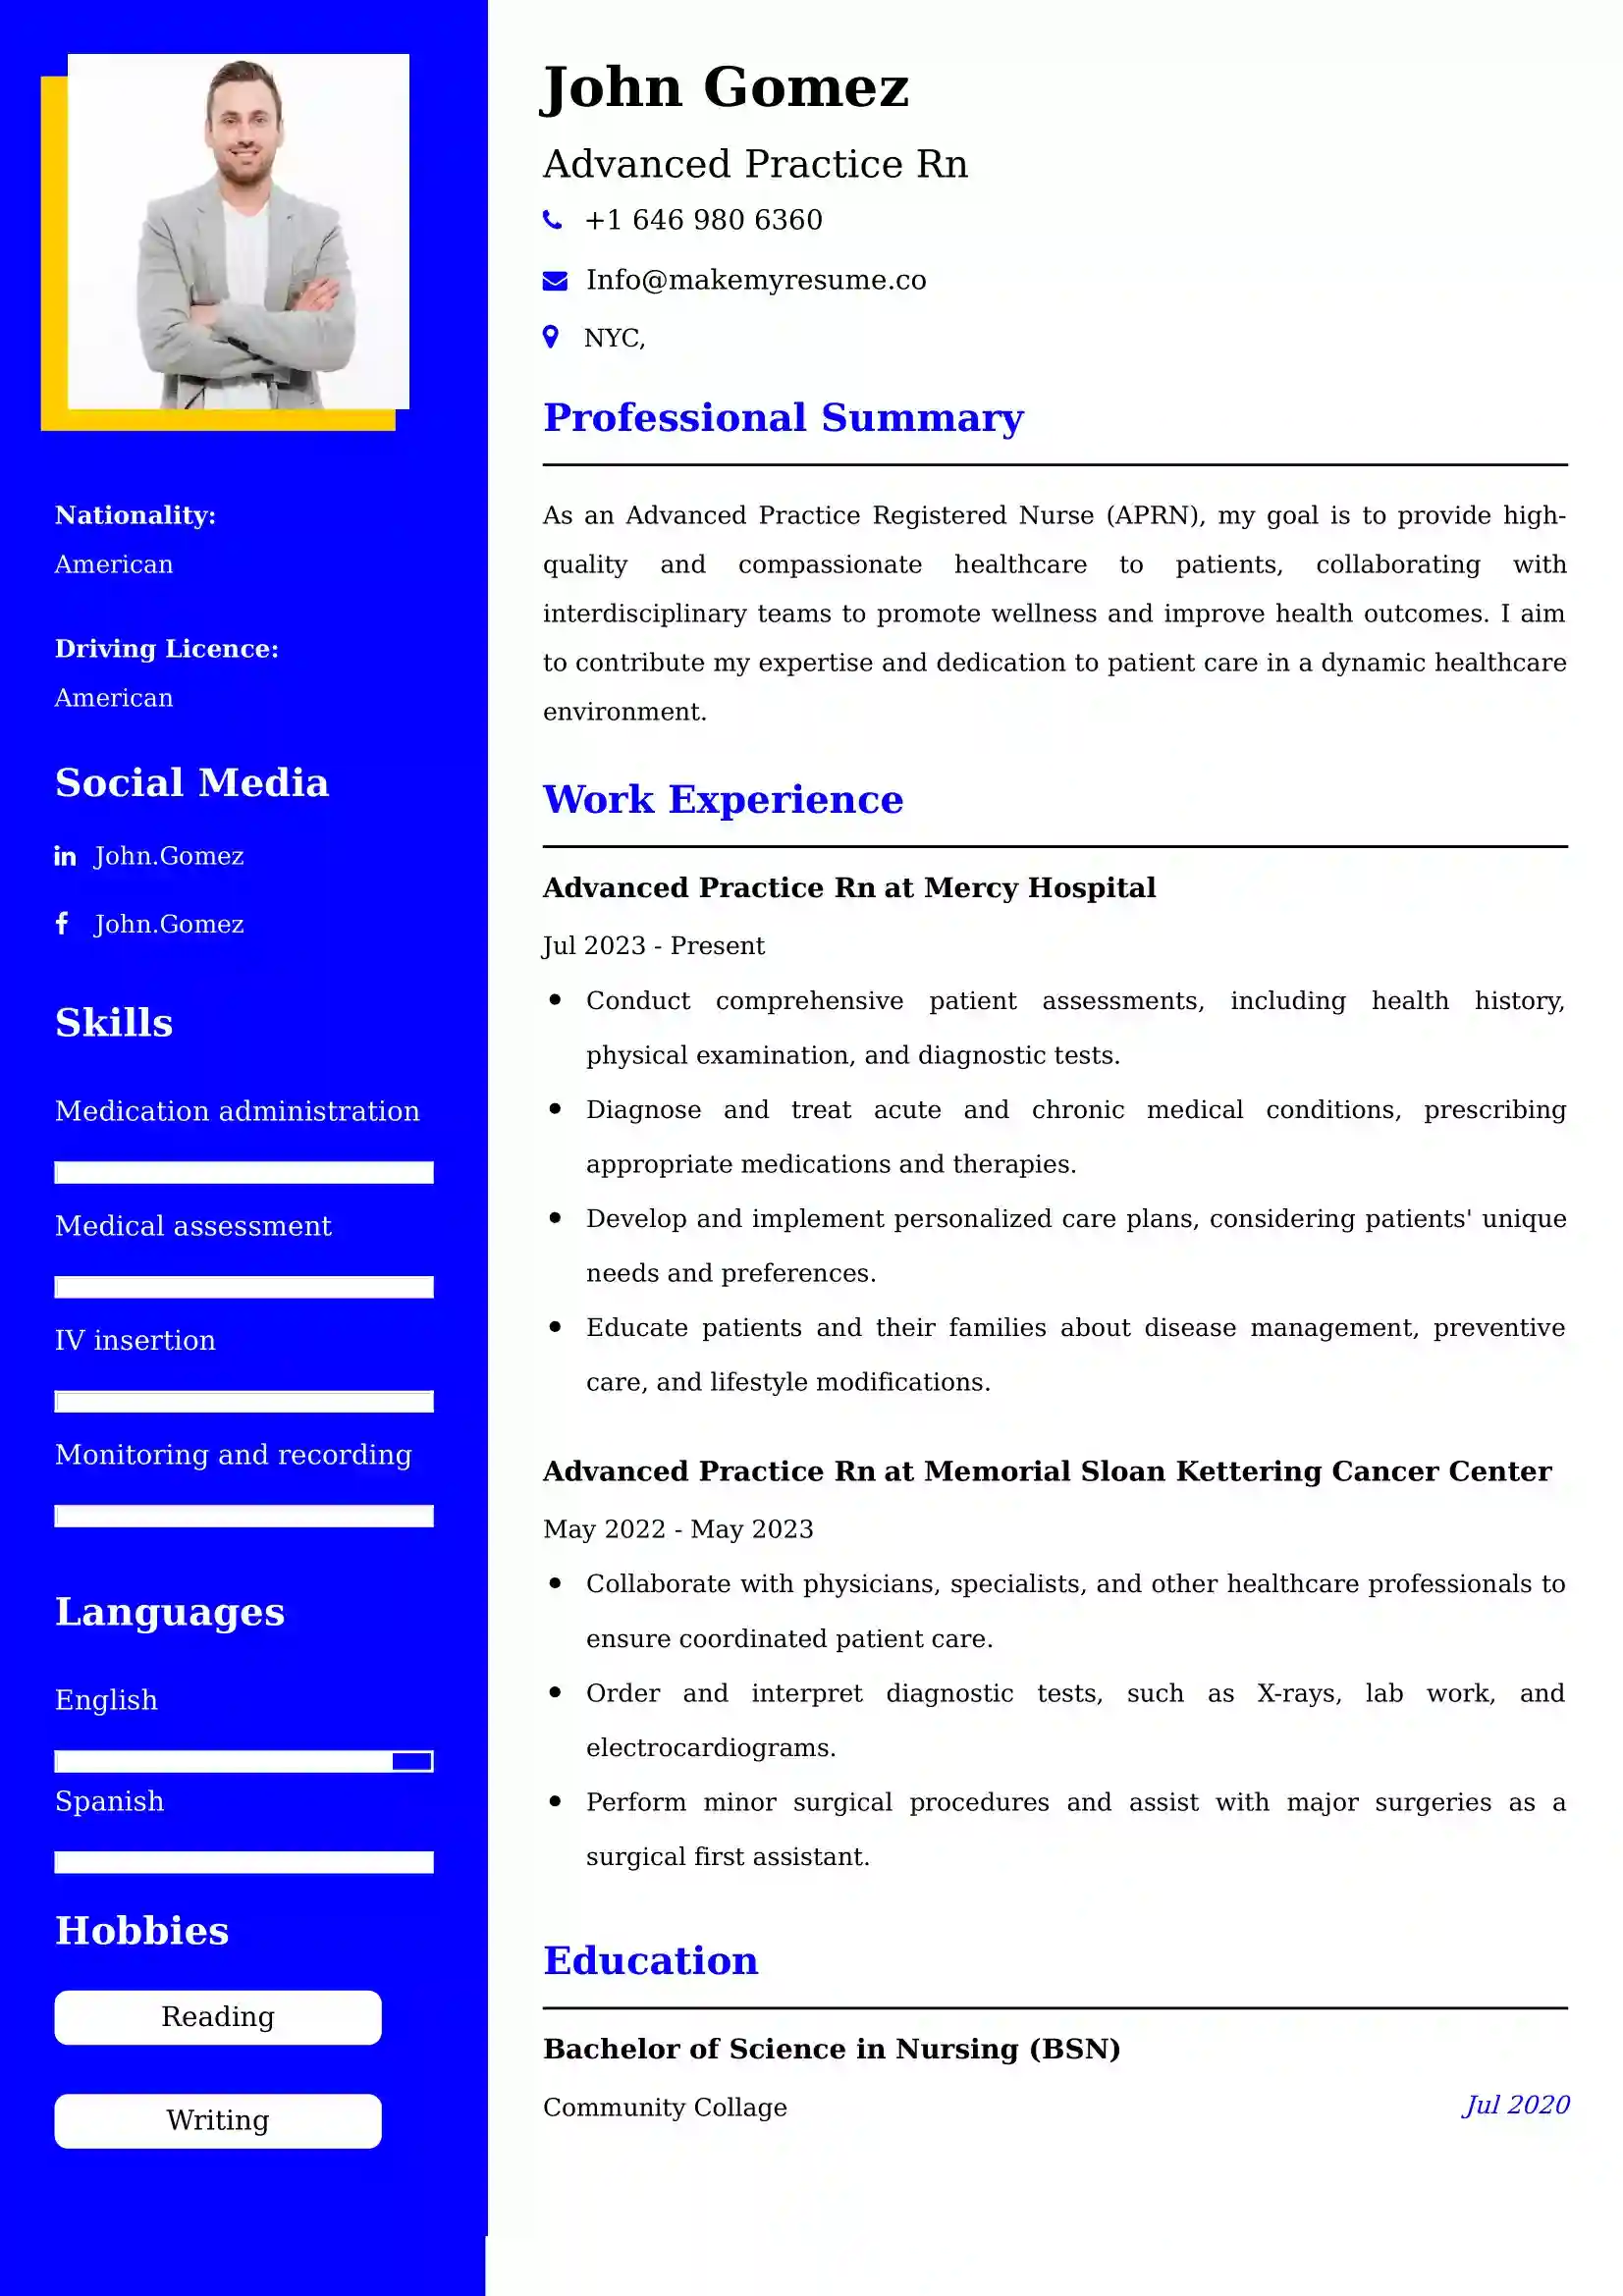 Advanced Practice Rn Resume Examples - UK Format, Latest Template.